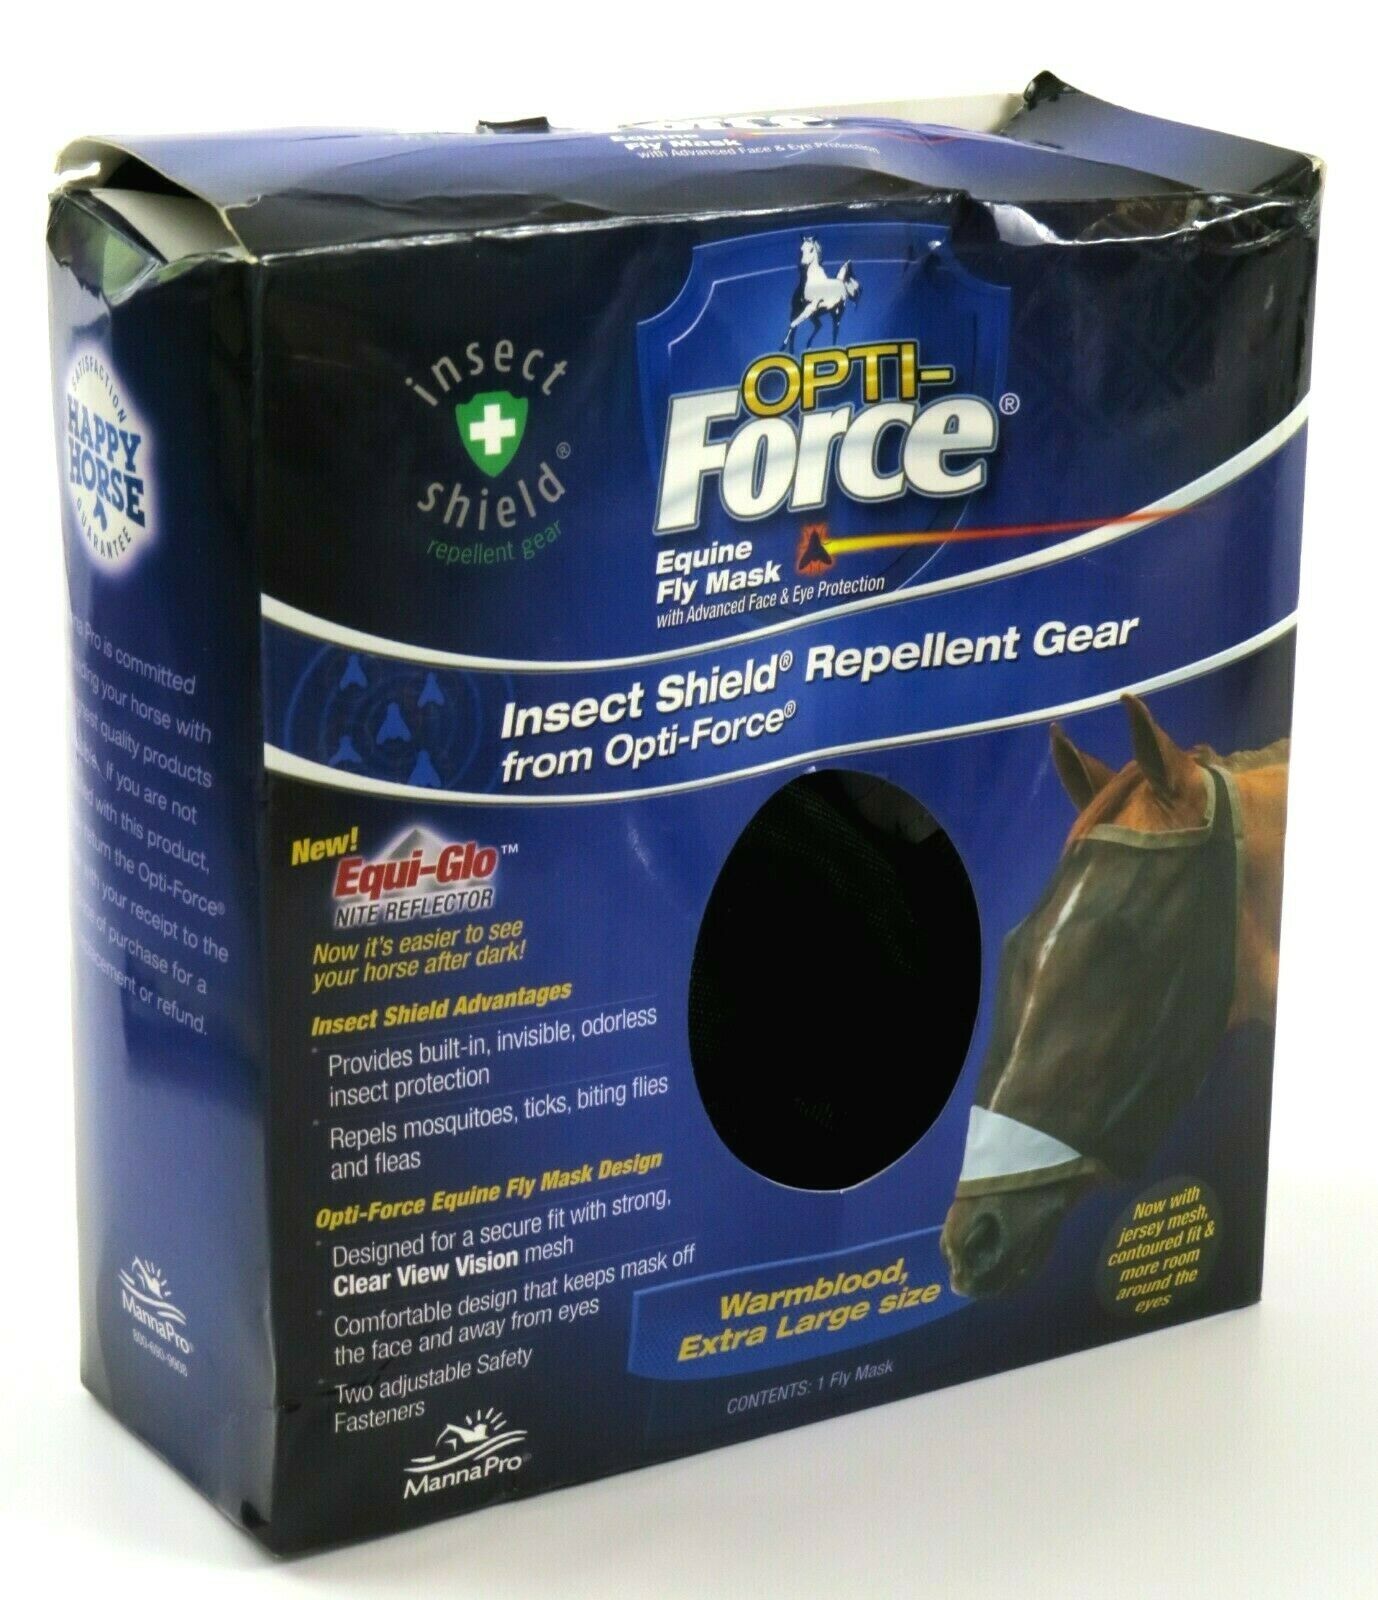 Opti-force Equine Fly Mask With Equi-glow Reflector - Warmblood Extra Large